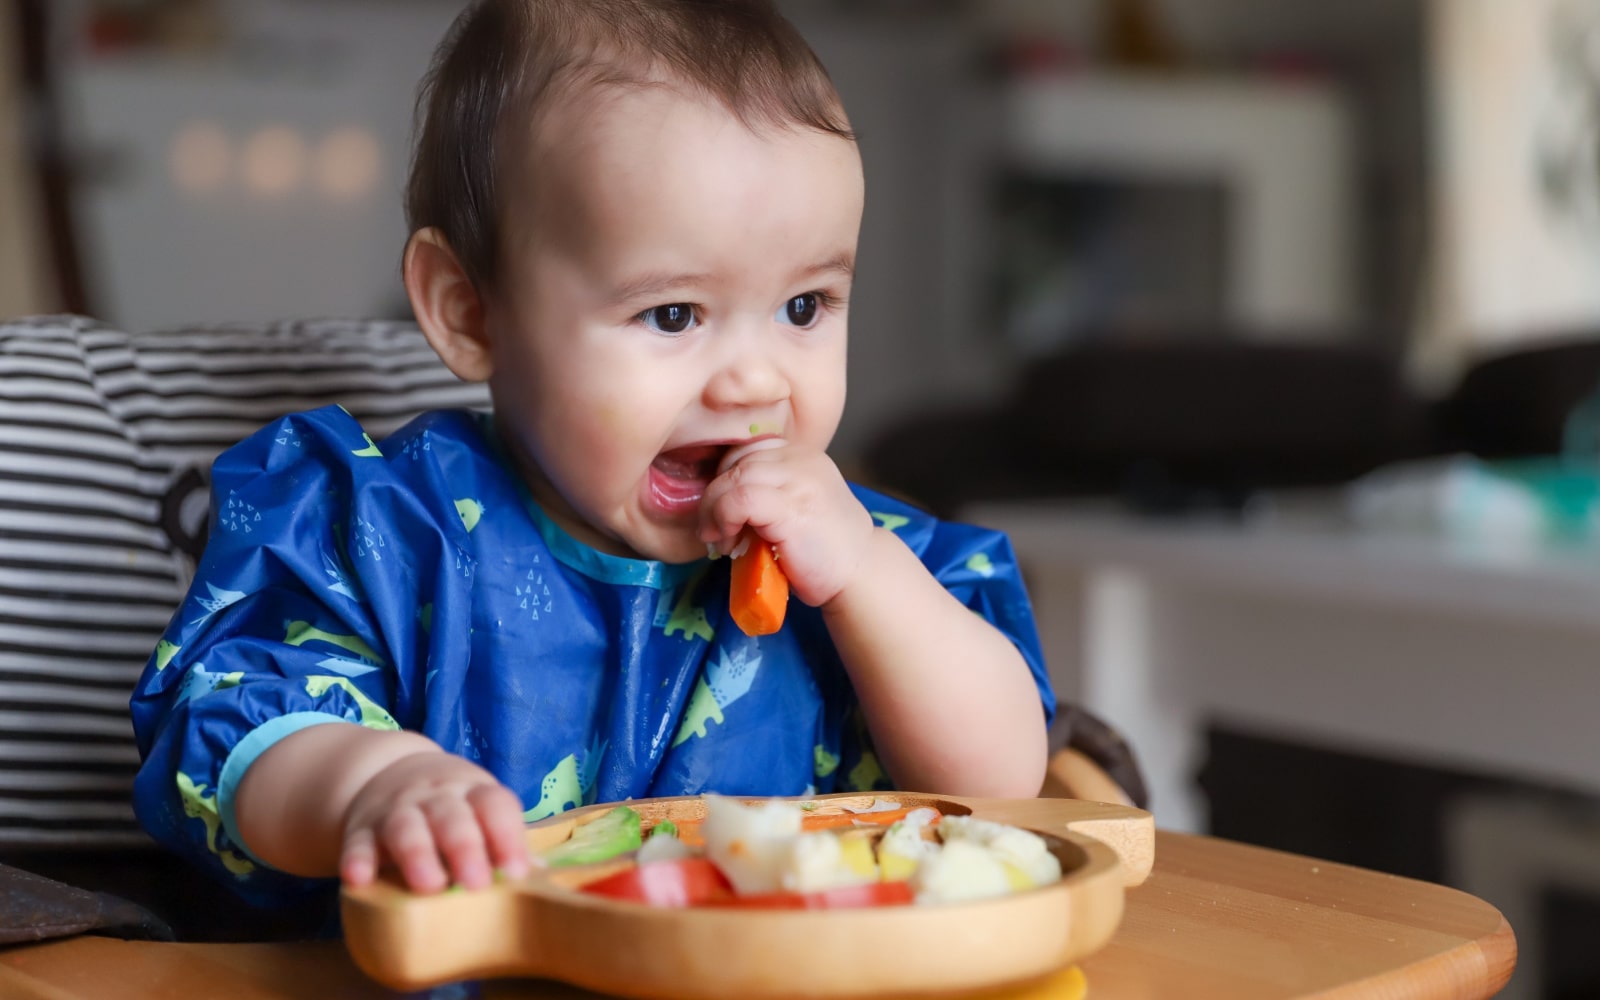 Child eating solid food